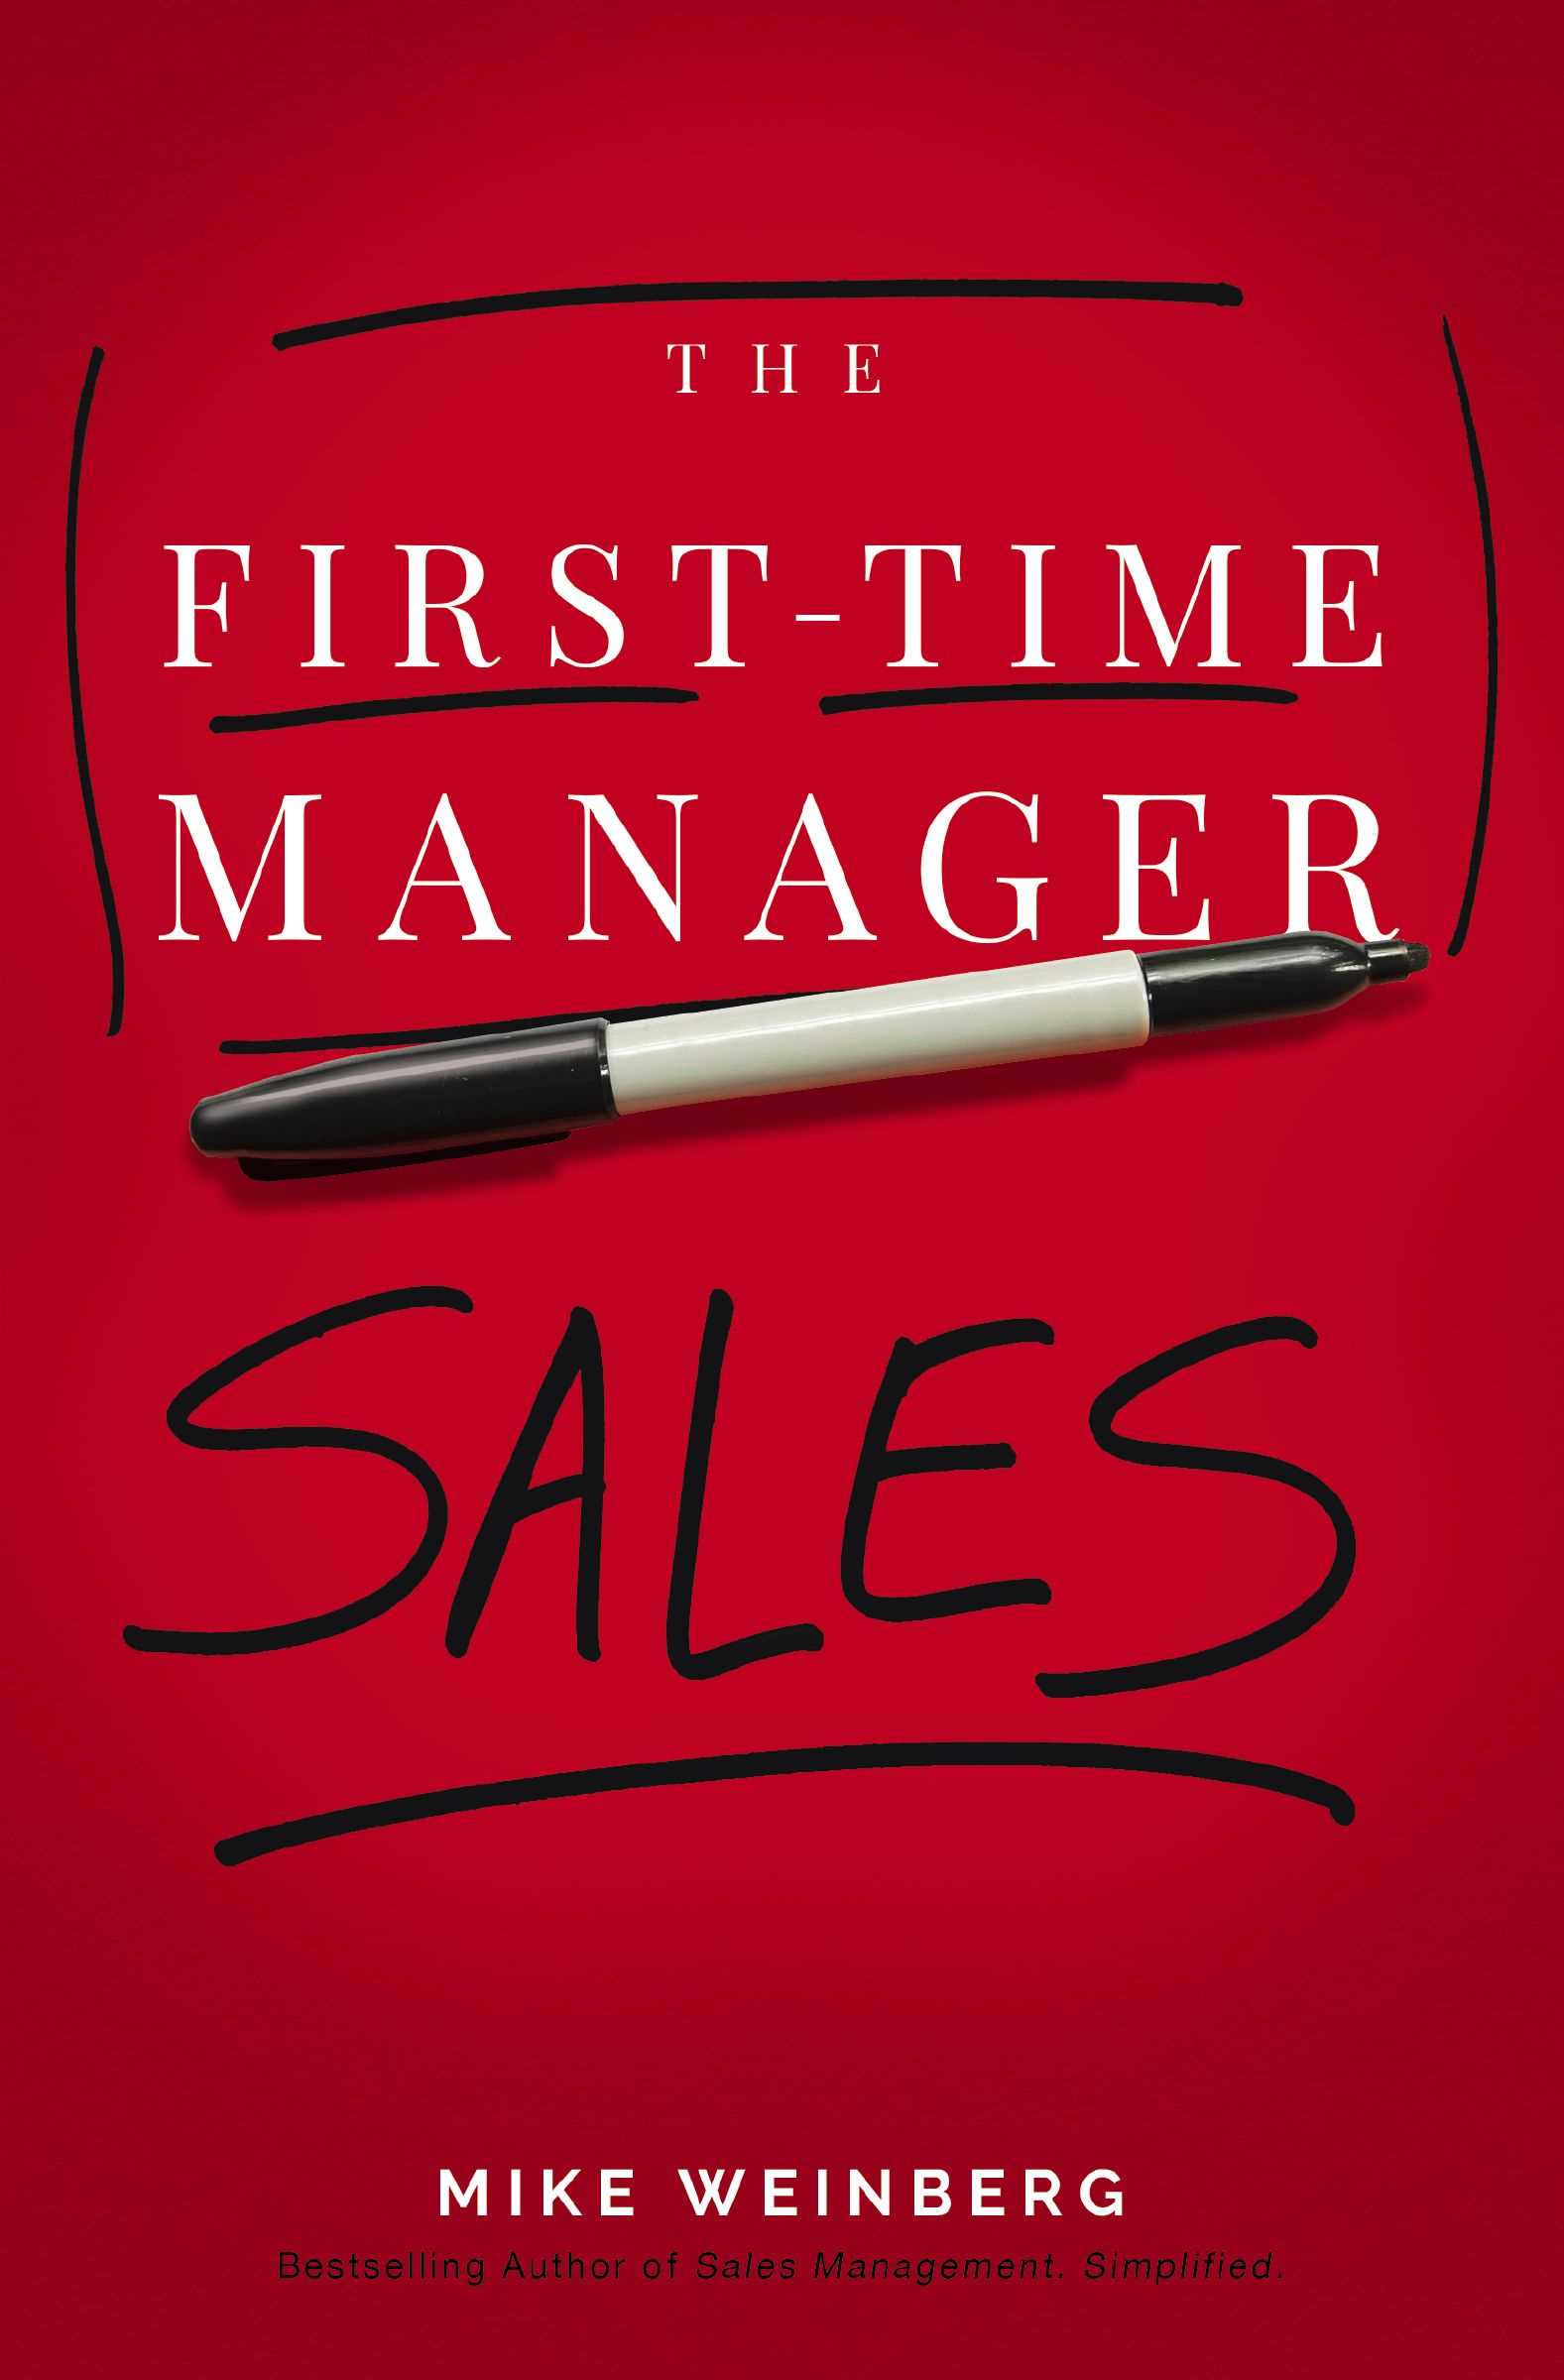 Sales (The First-Time Manager)